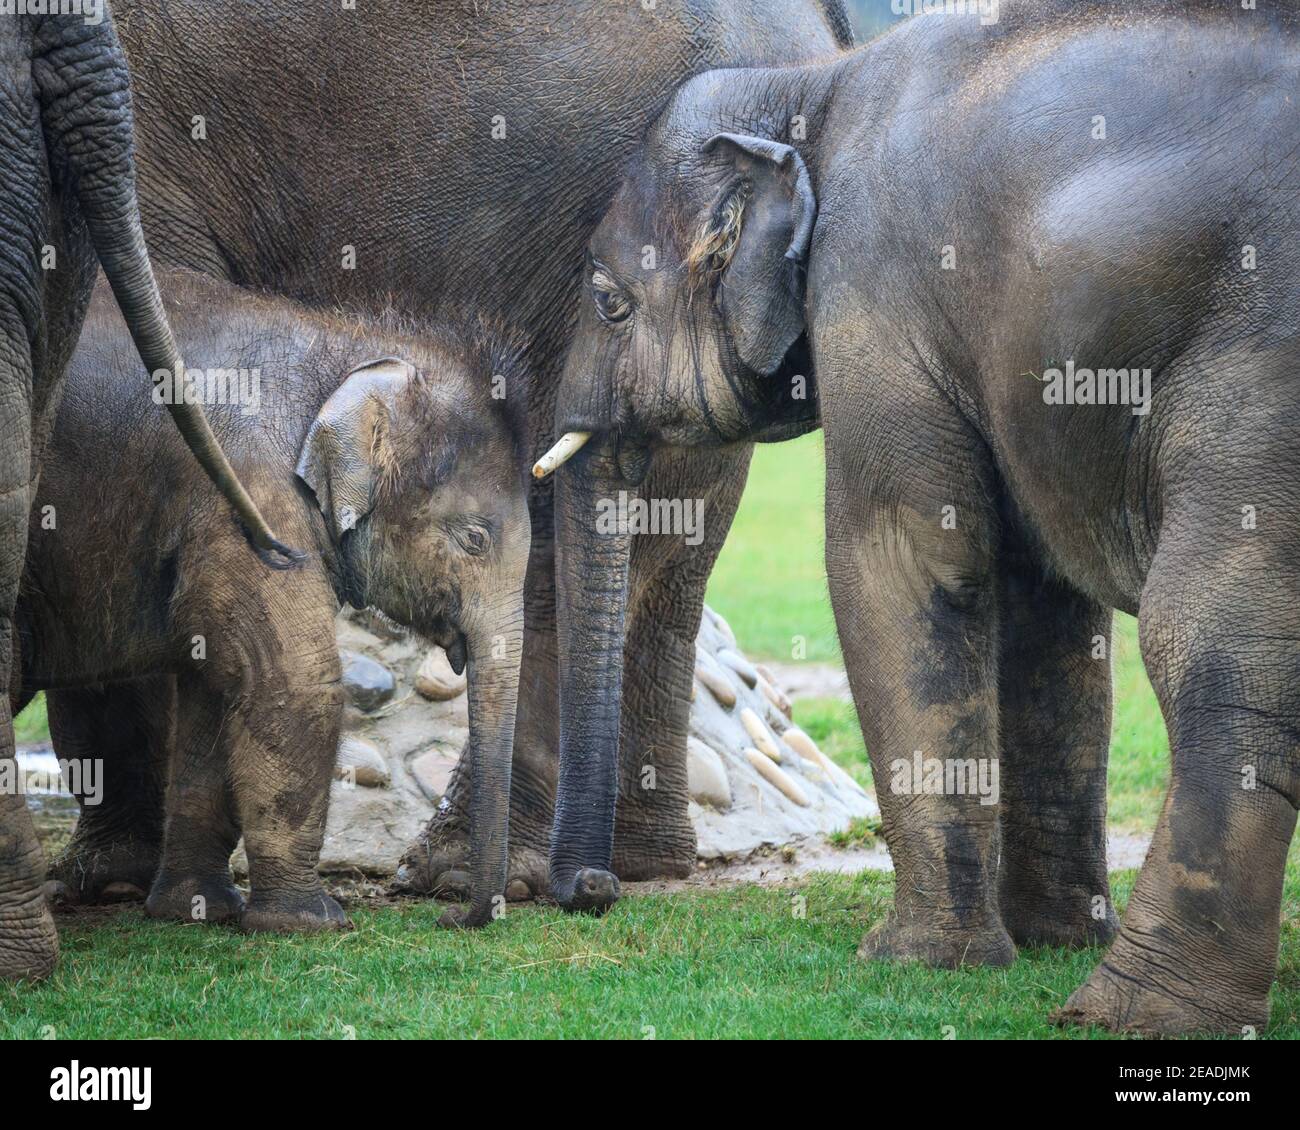 Asian elephant baby (Elephas maximus) protected by herd, group of Asiatic elephants in outdoor paddock, ZSL Whipsnade, UK Stock Photo